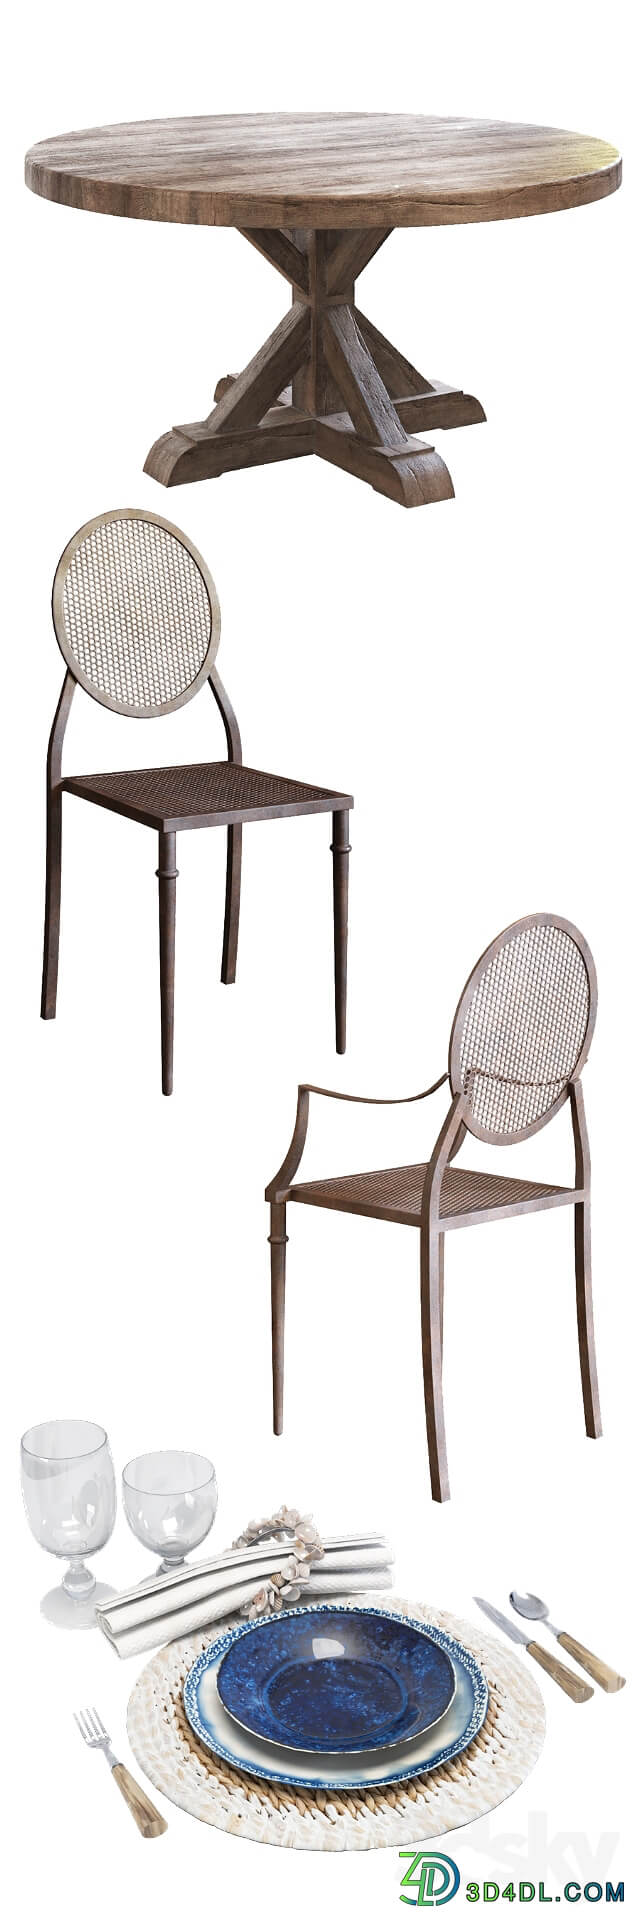 Table Chair Flamant dining set 001